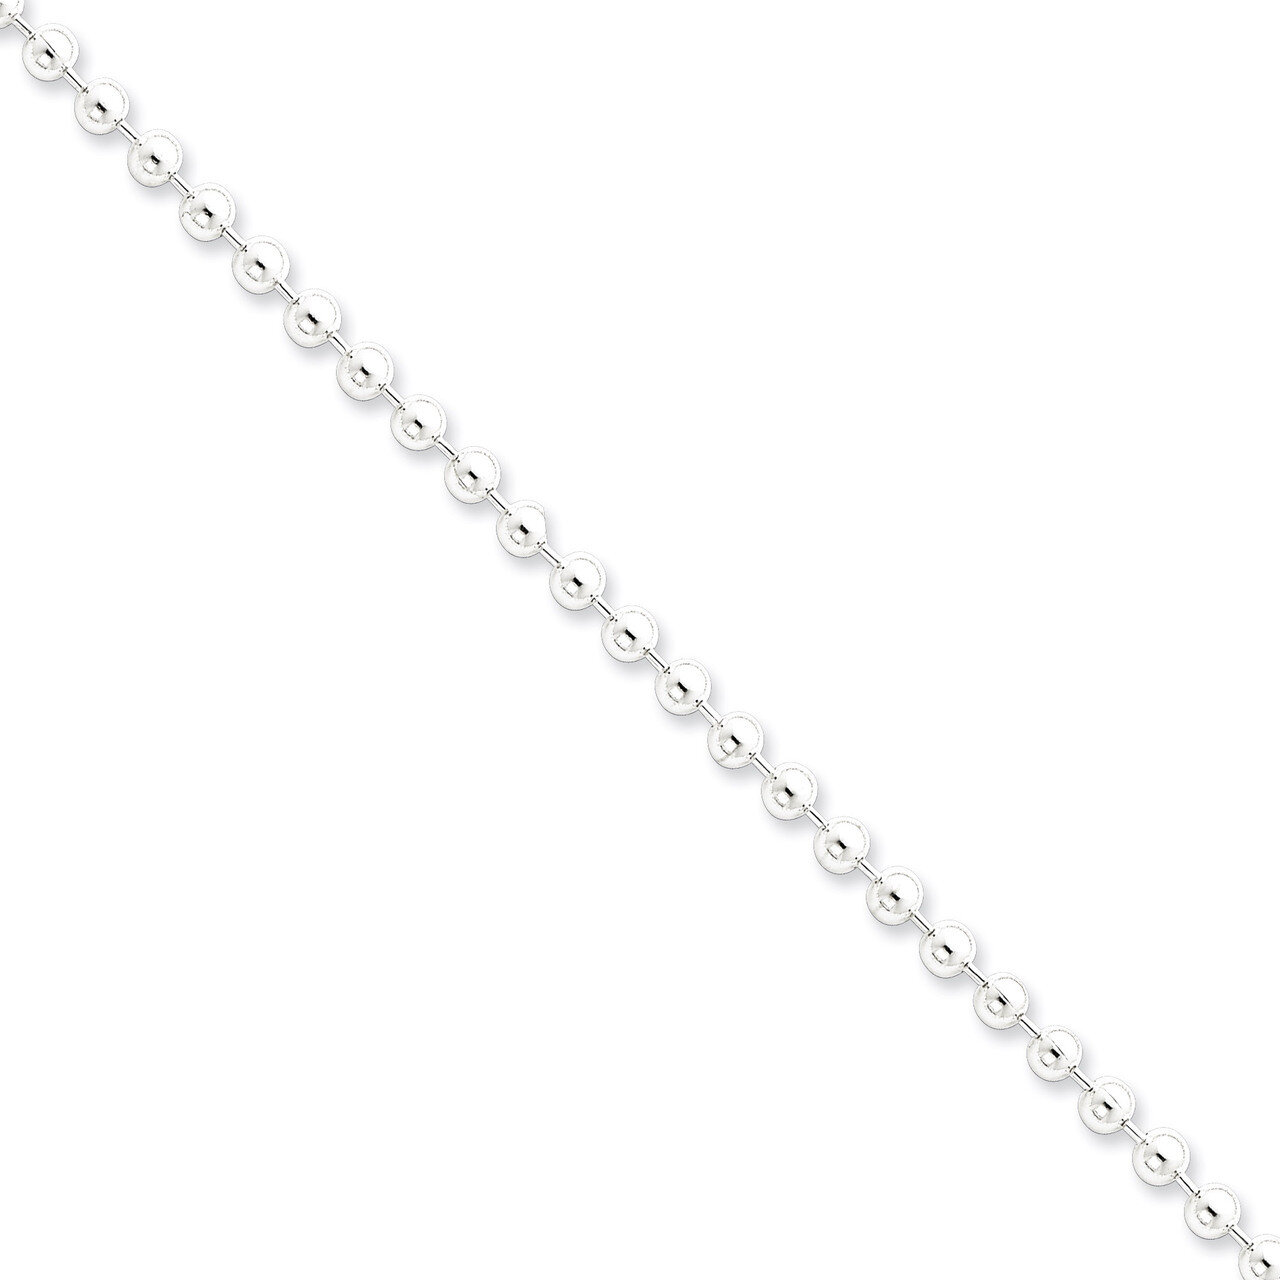 16 Inch 4mm Beaded Necklace Sterling Silver QK29-16